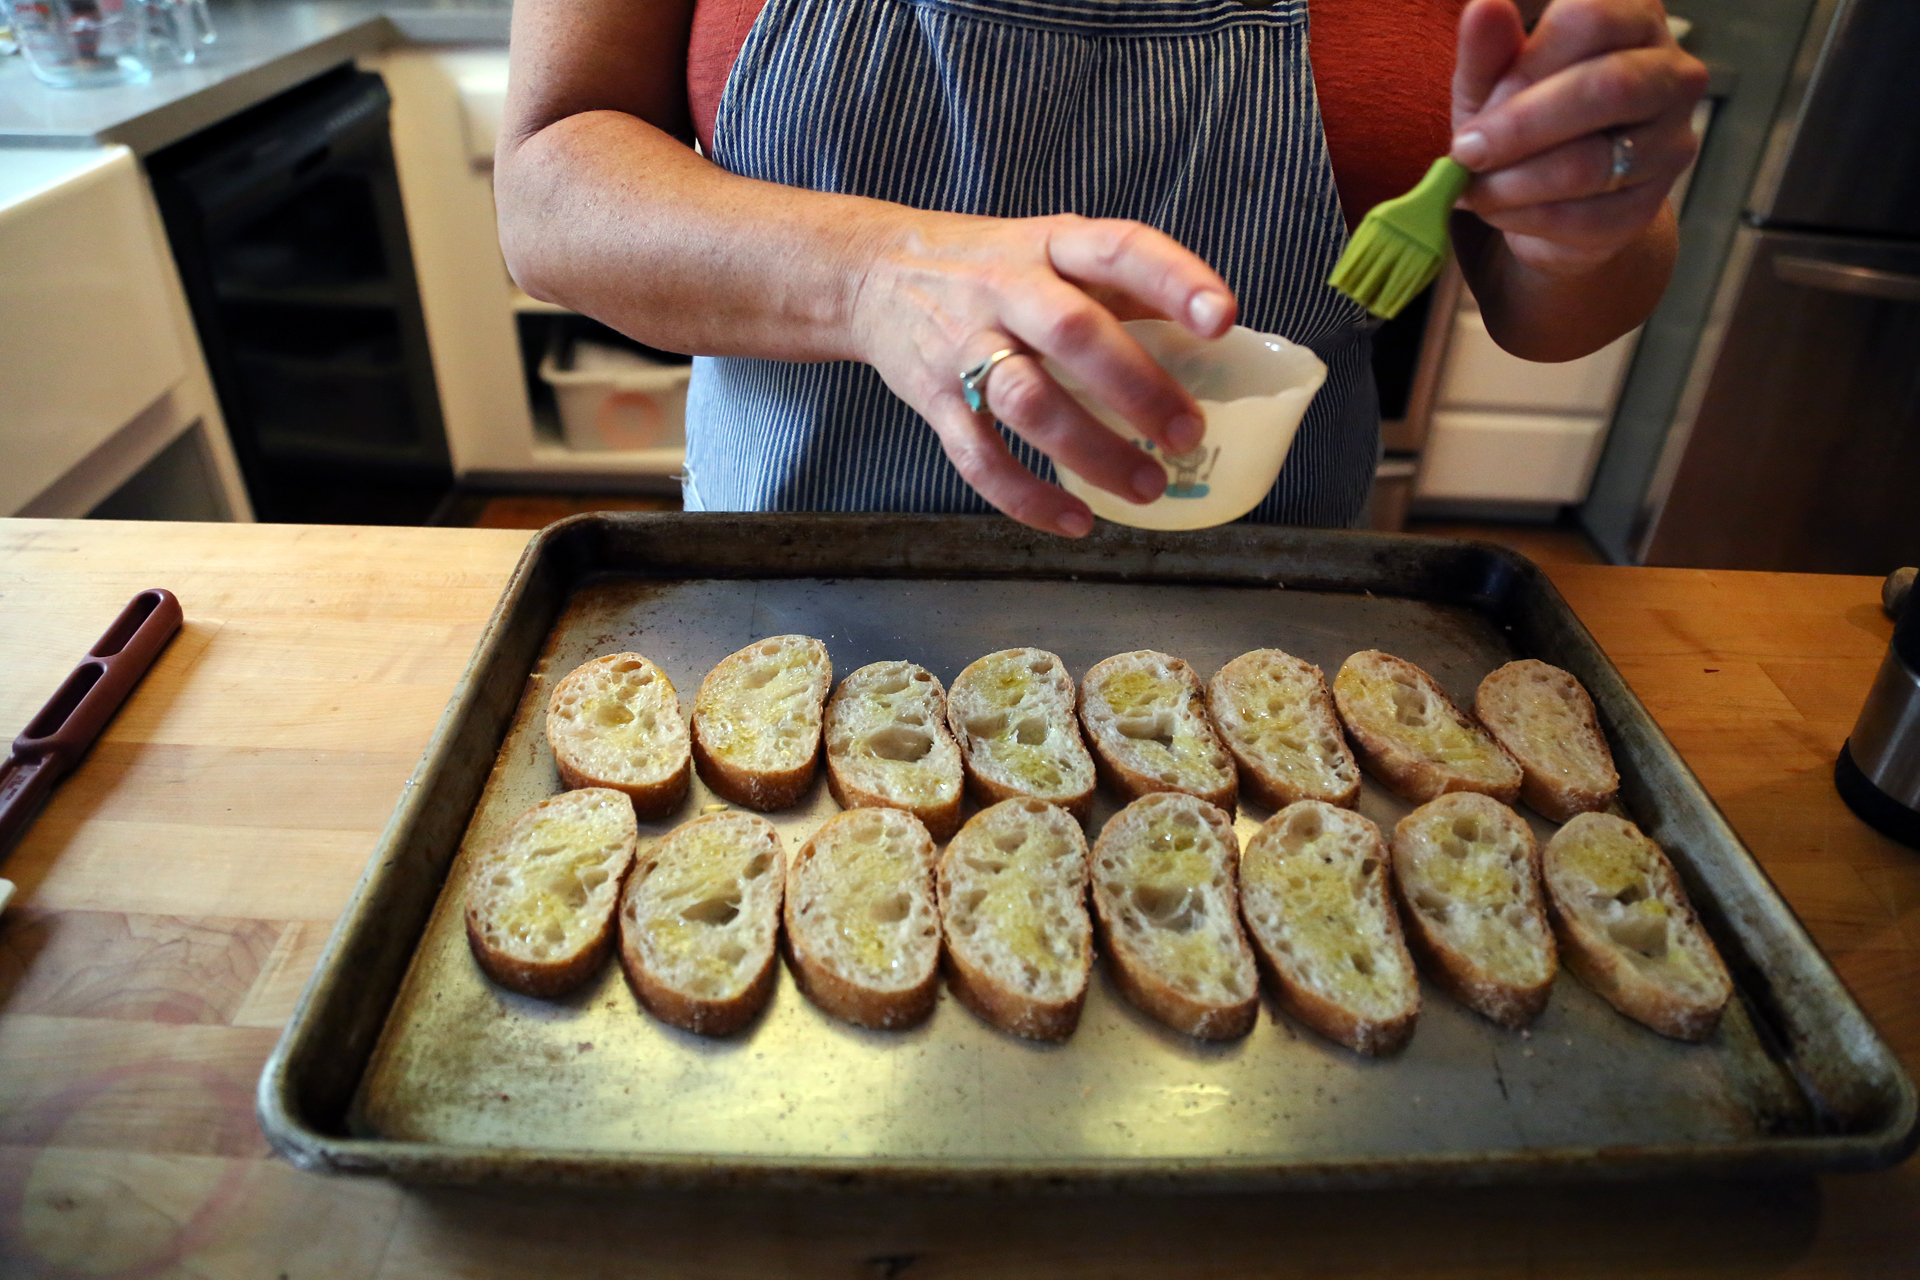 Brush both sides of each baguette slice with olive oil and place on a baking sheet. Toast in the oven until golden brown, about 10 minutes.